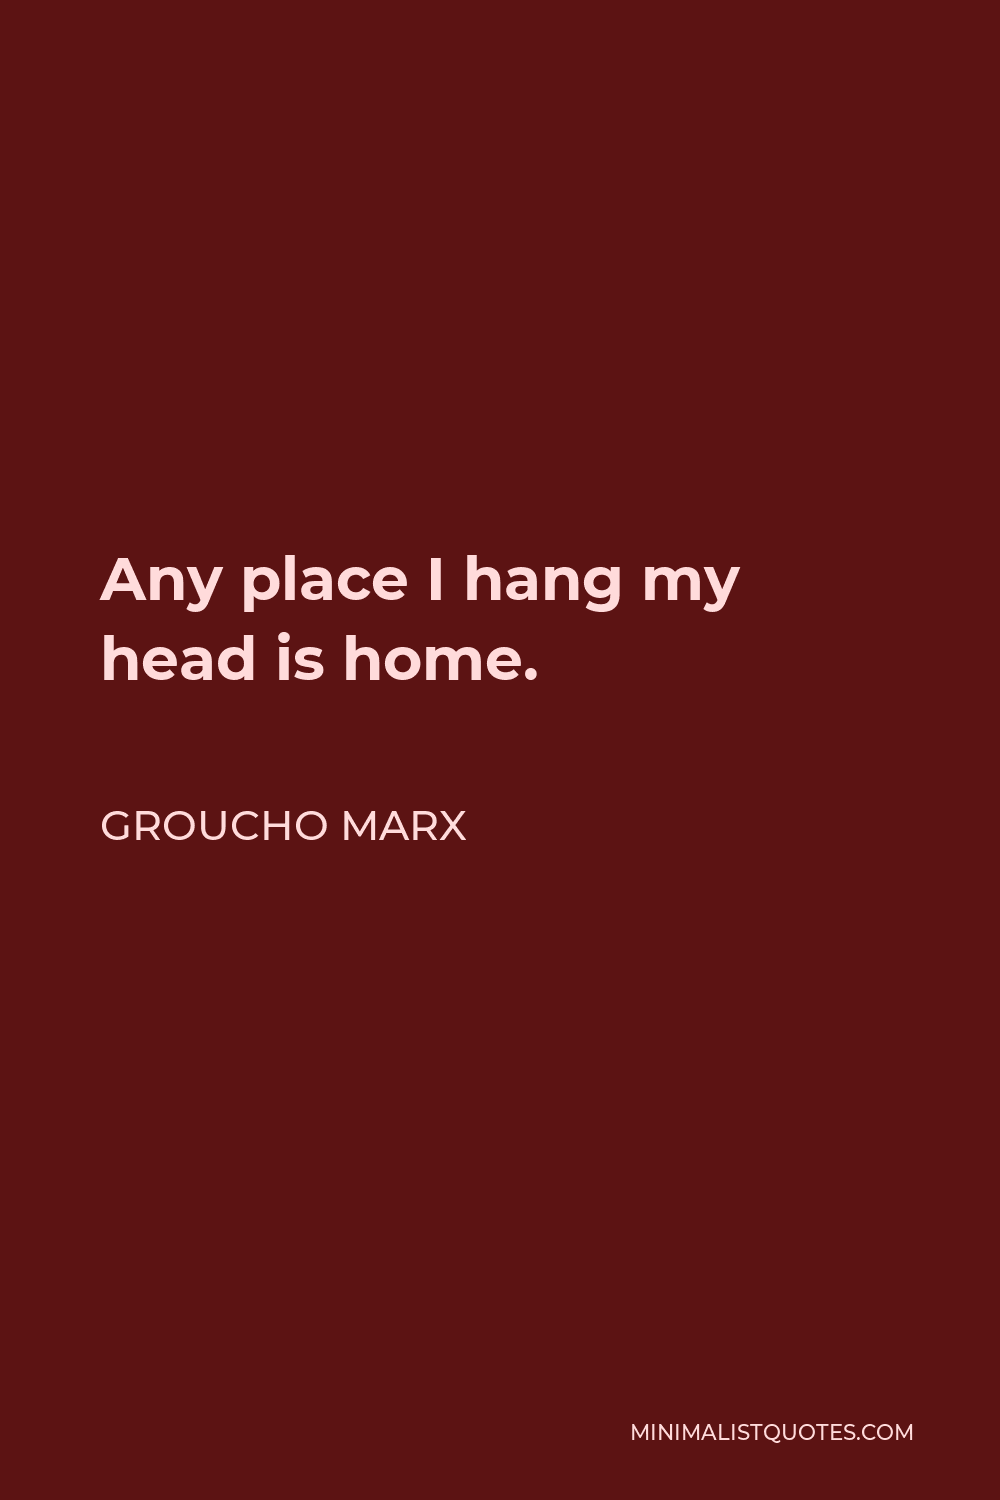 Groucho Marx Quote - Any place I hang my head is home.